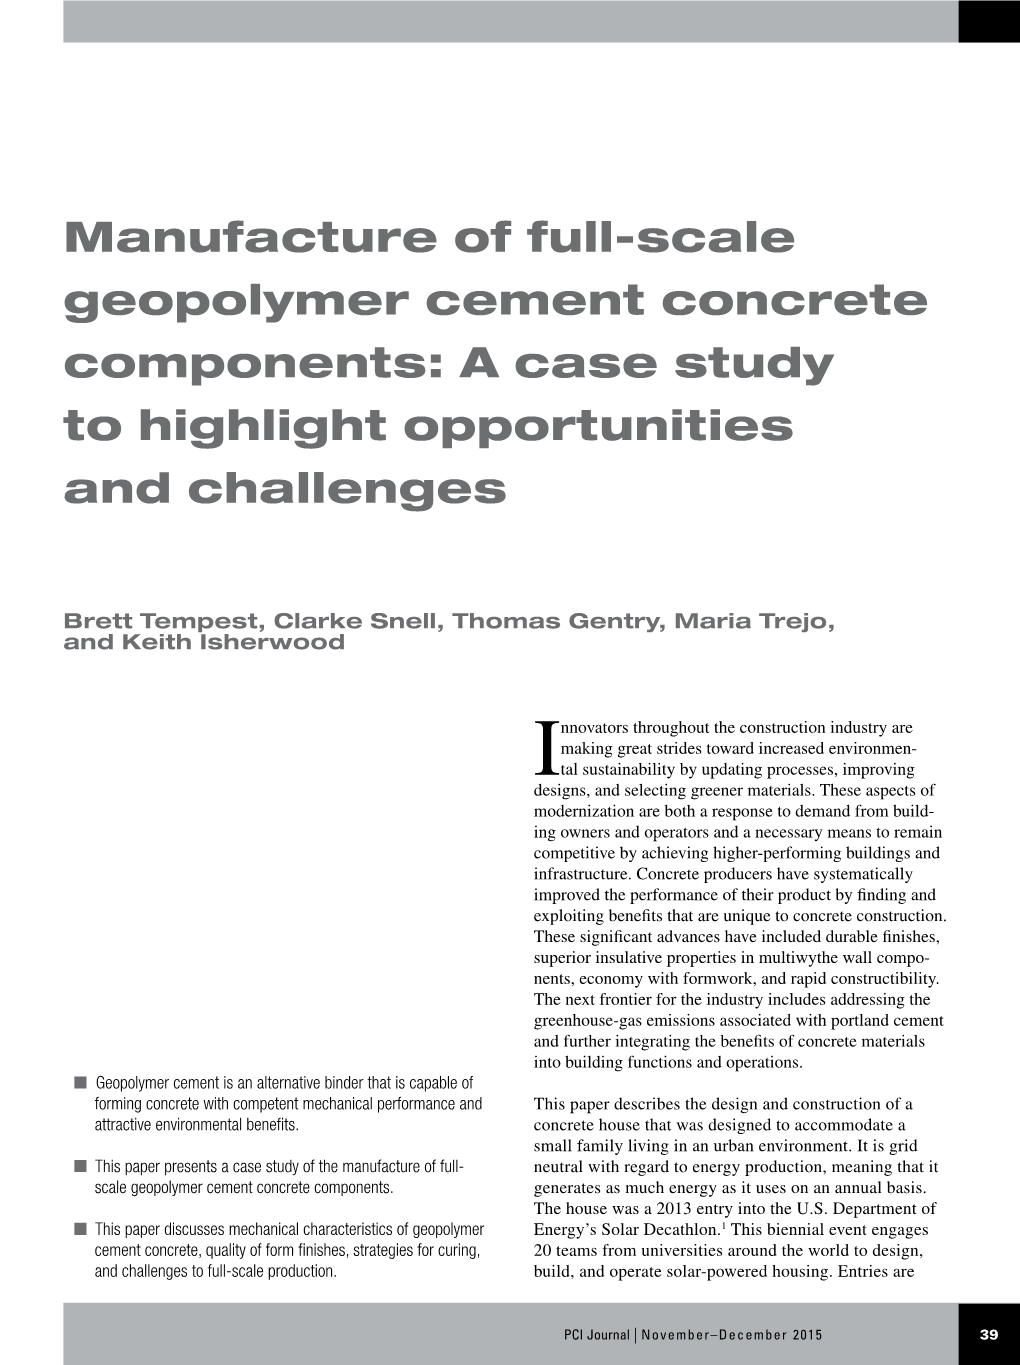 Manufacture of Full-Scale Geopolymer Cement Concrete Components: a Case Study to Highlight Opportunities and Challenges